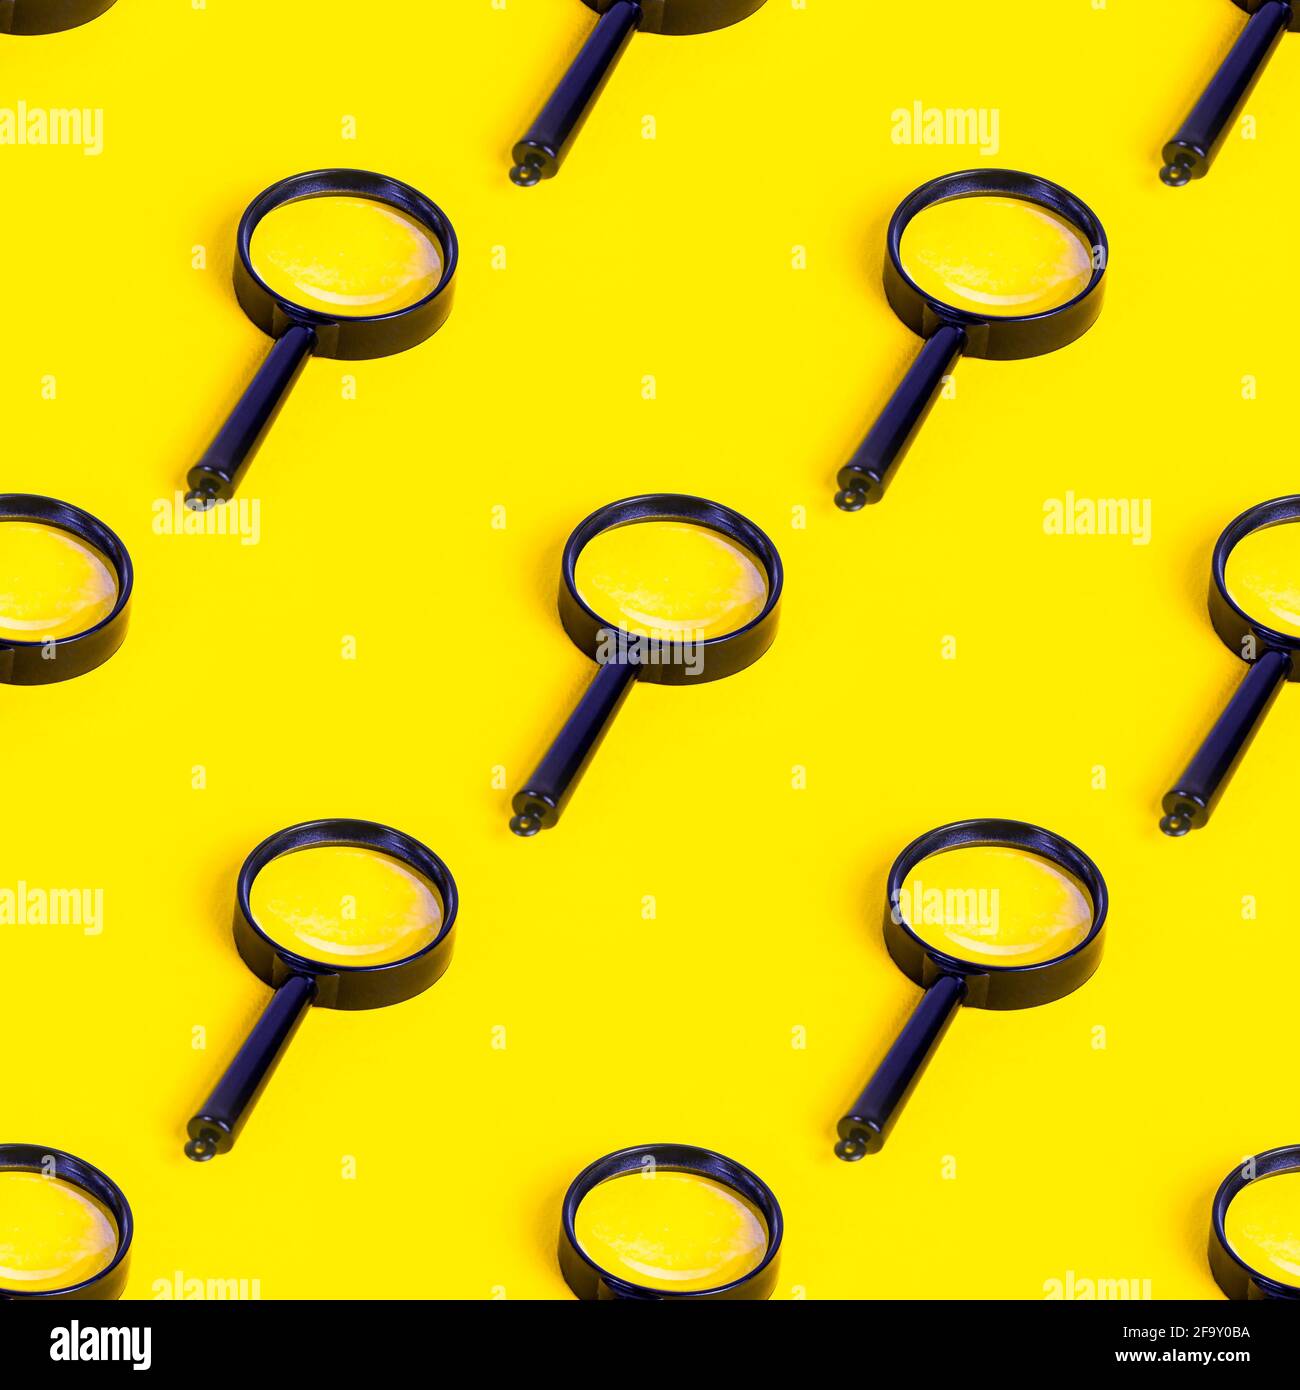 Magnifying glass repeat seamless pattern on light yellow background. Stock Photo